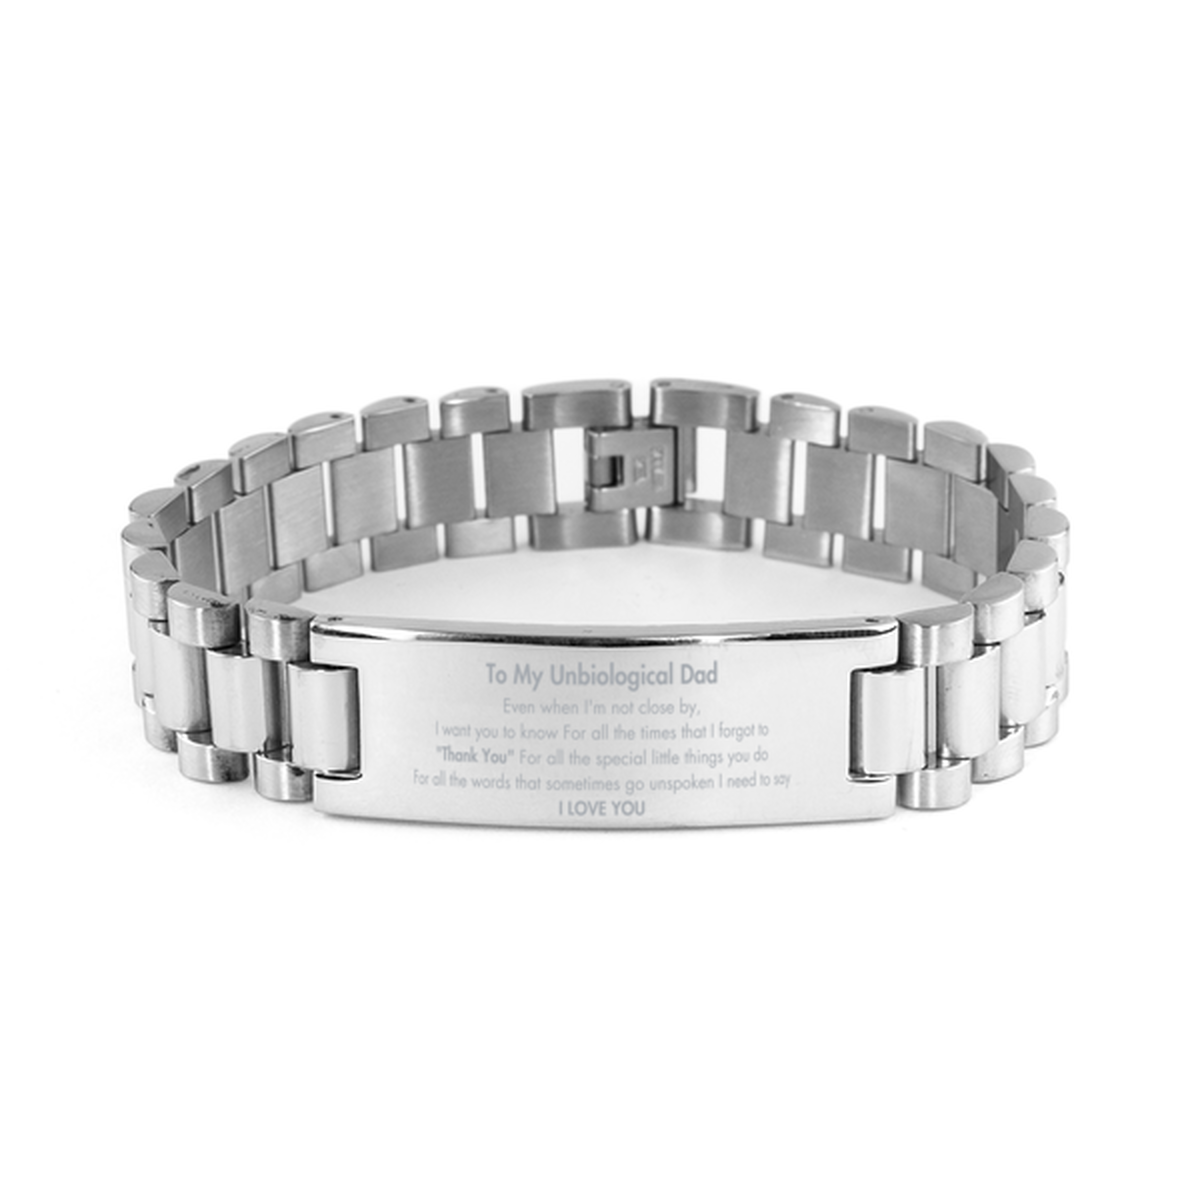 Thank You Gifts for Unbiological Dad, Keepsake Ladder Stainless Steel Bracelet Gifts for Unbiological Dad Birthday Mother's day Father's Day Unbiological Dad For all the words That sometimes go unspoken I need to say I LOVE YOU